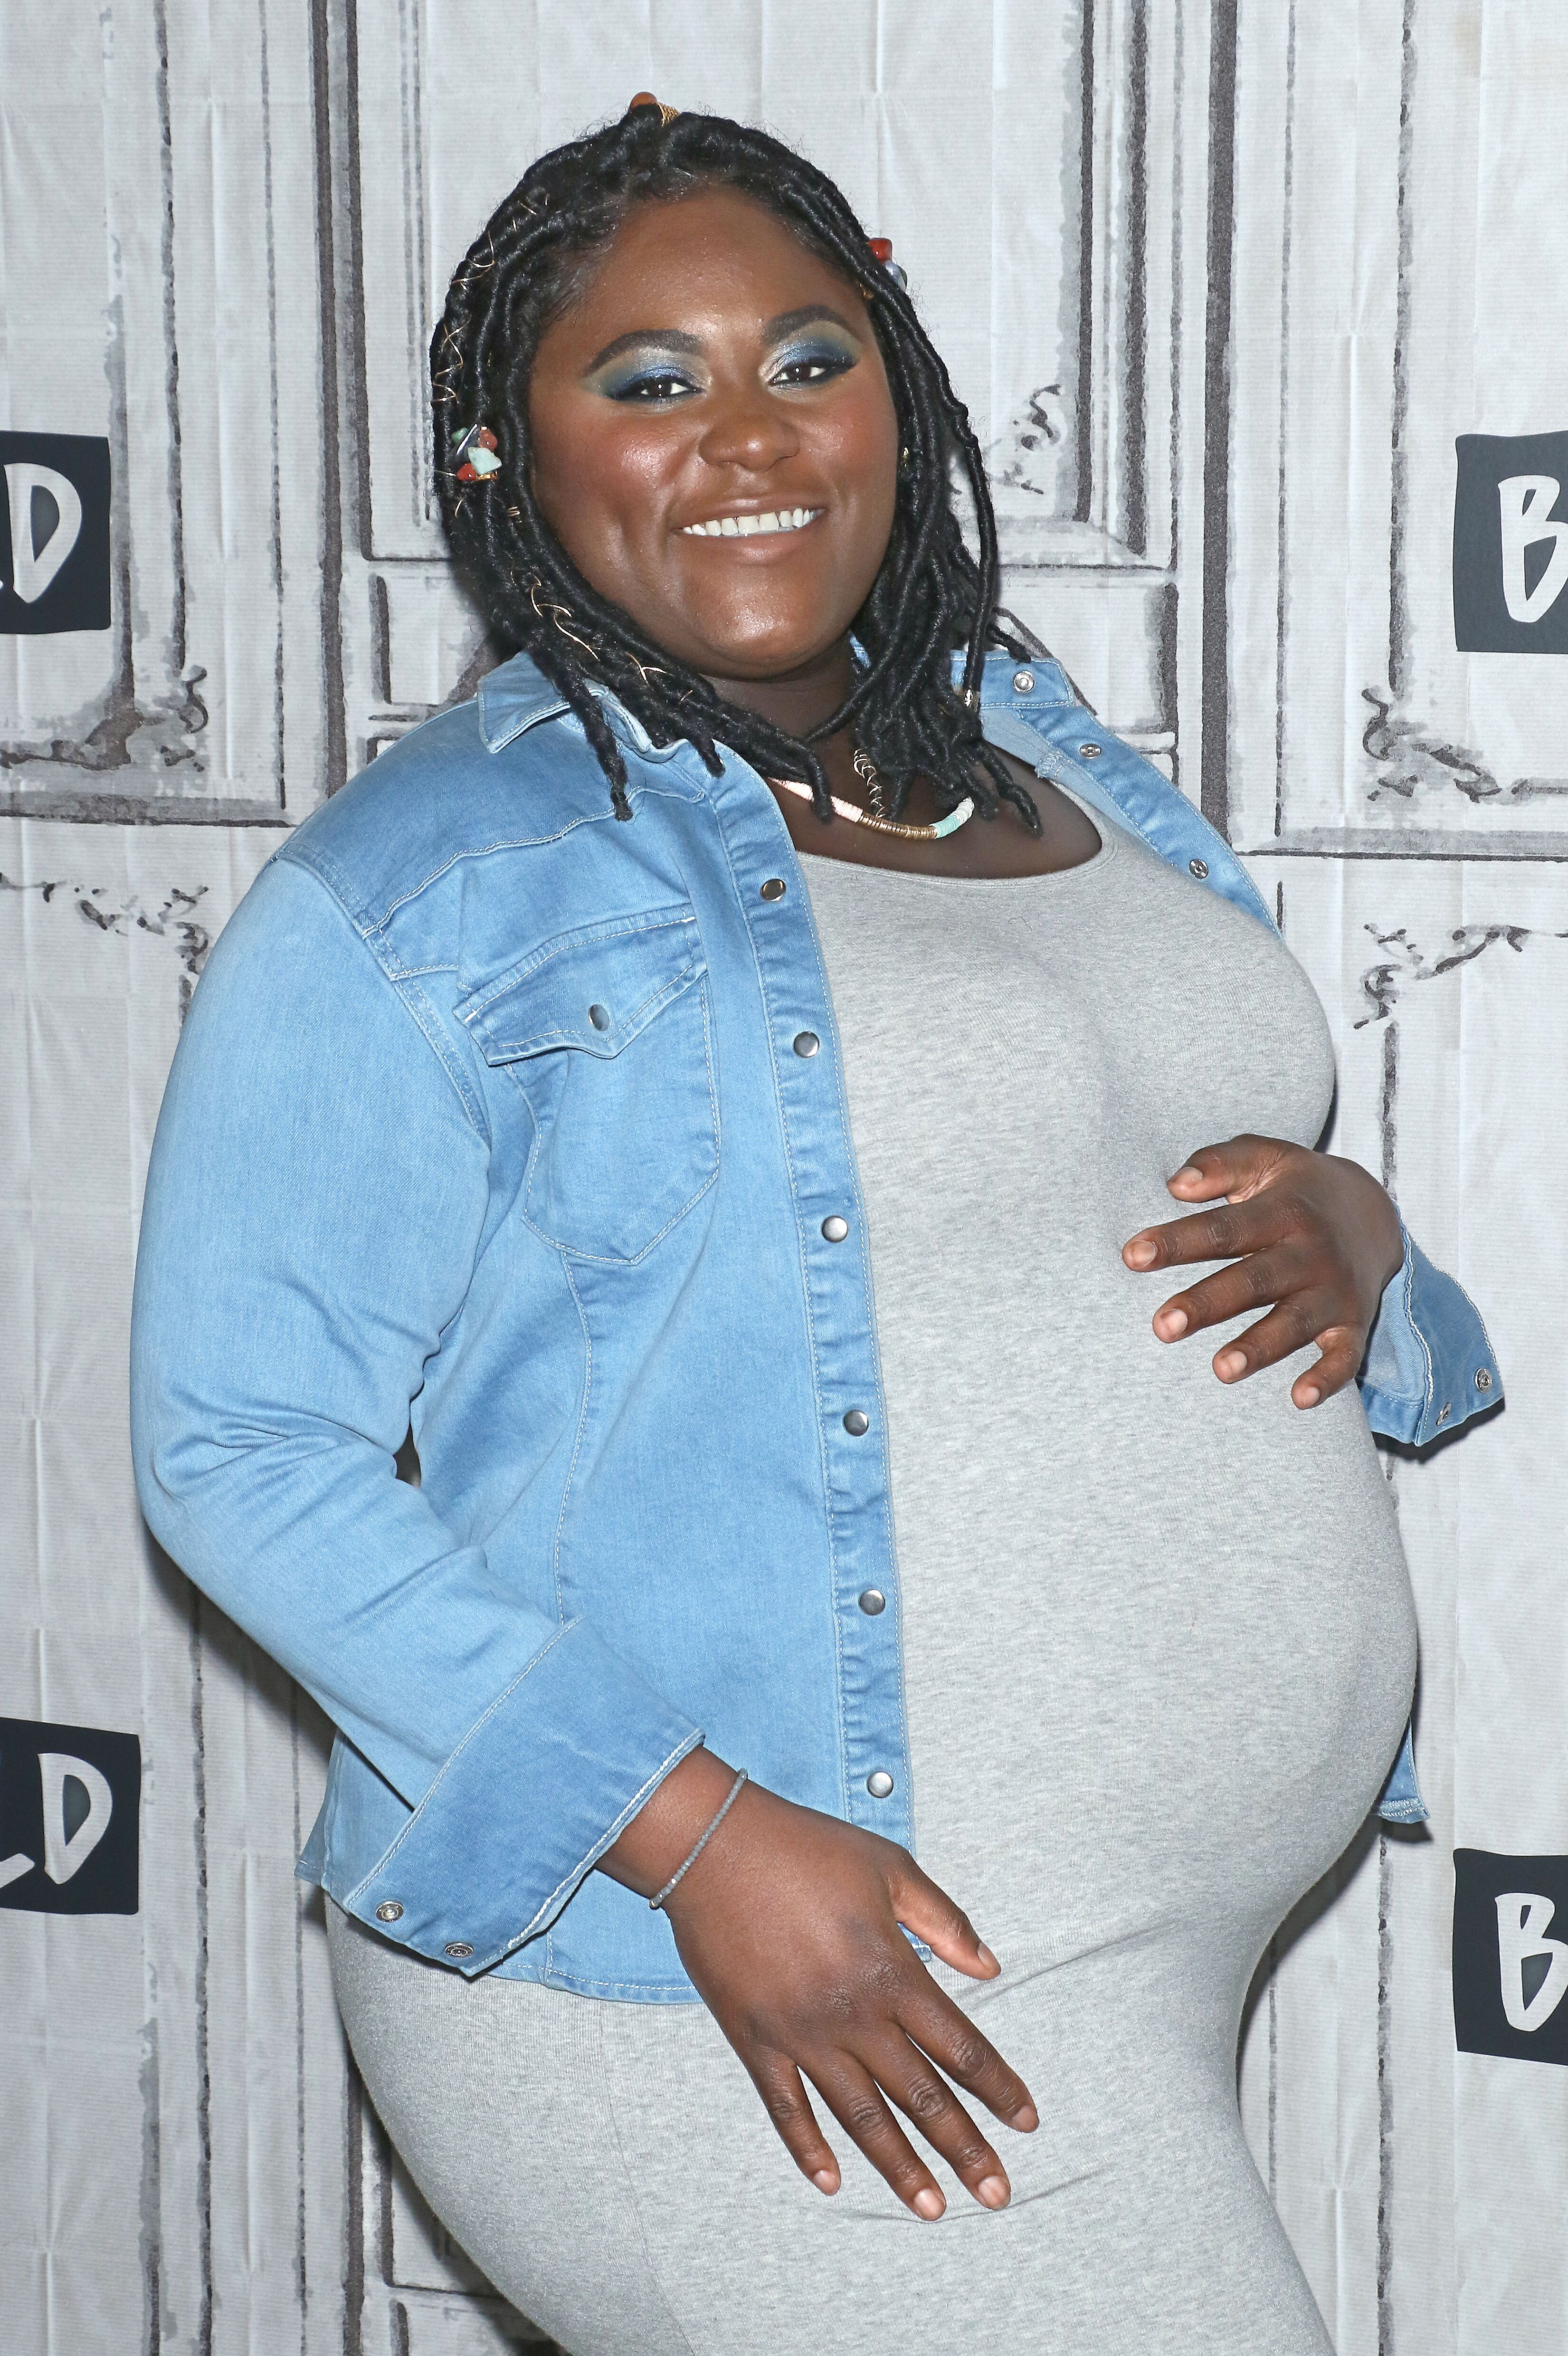 Danielle Brooks flaunting her baby bump at an event | Photo: Getty Images